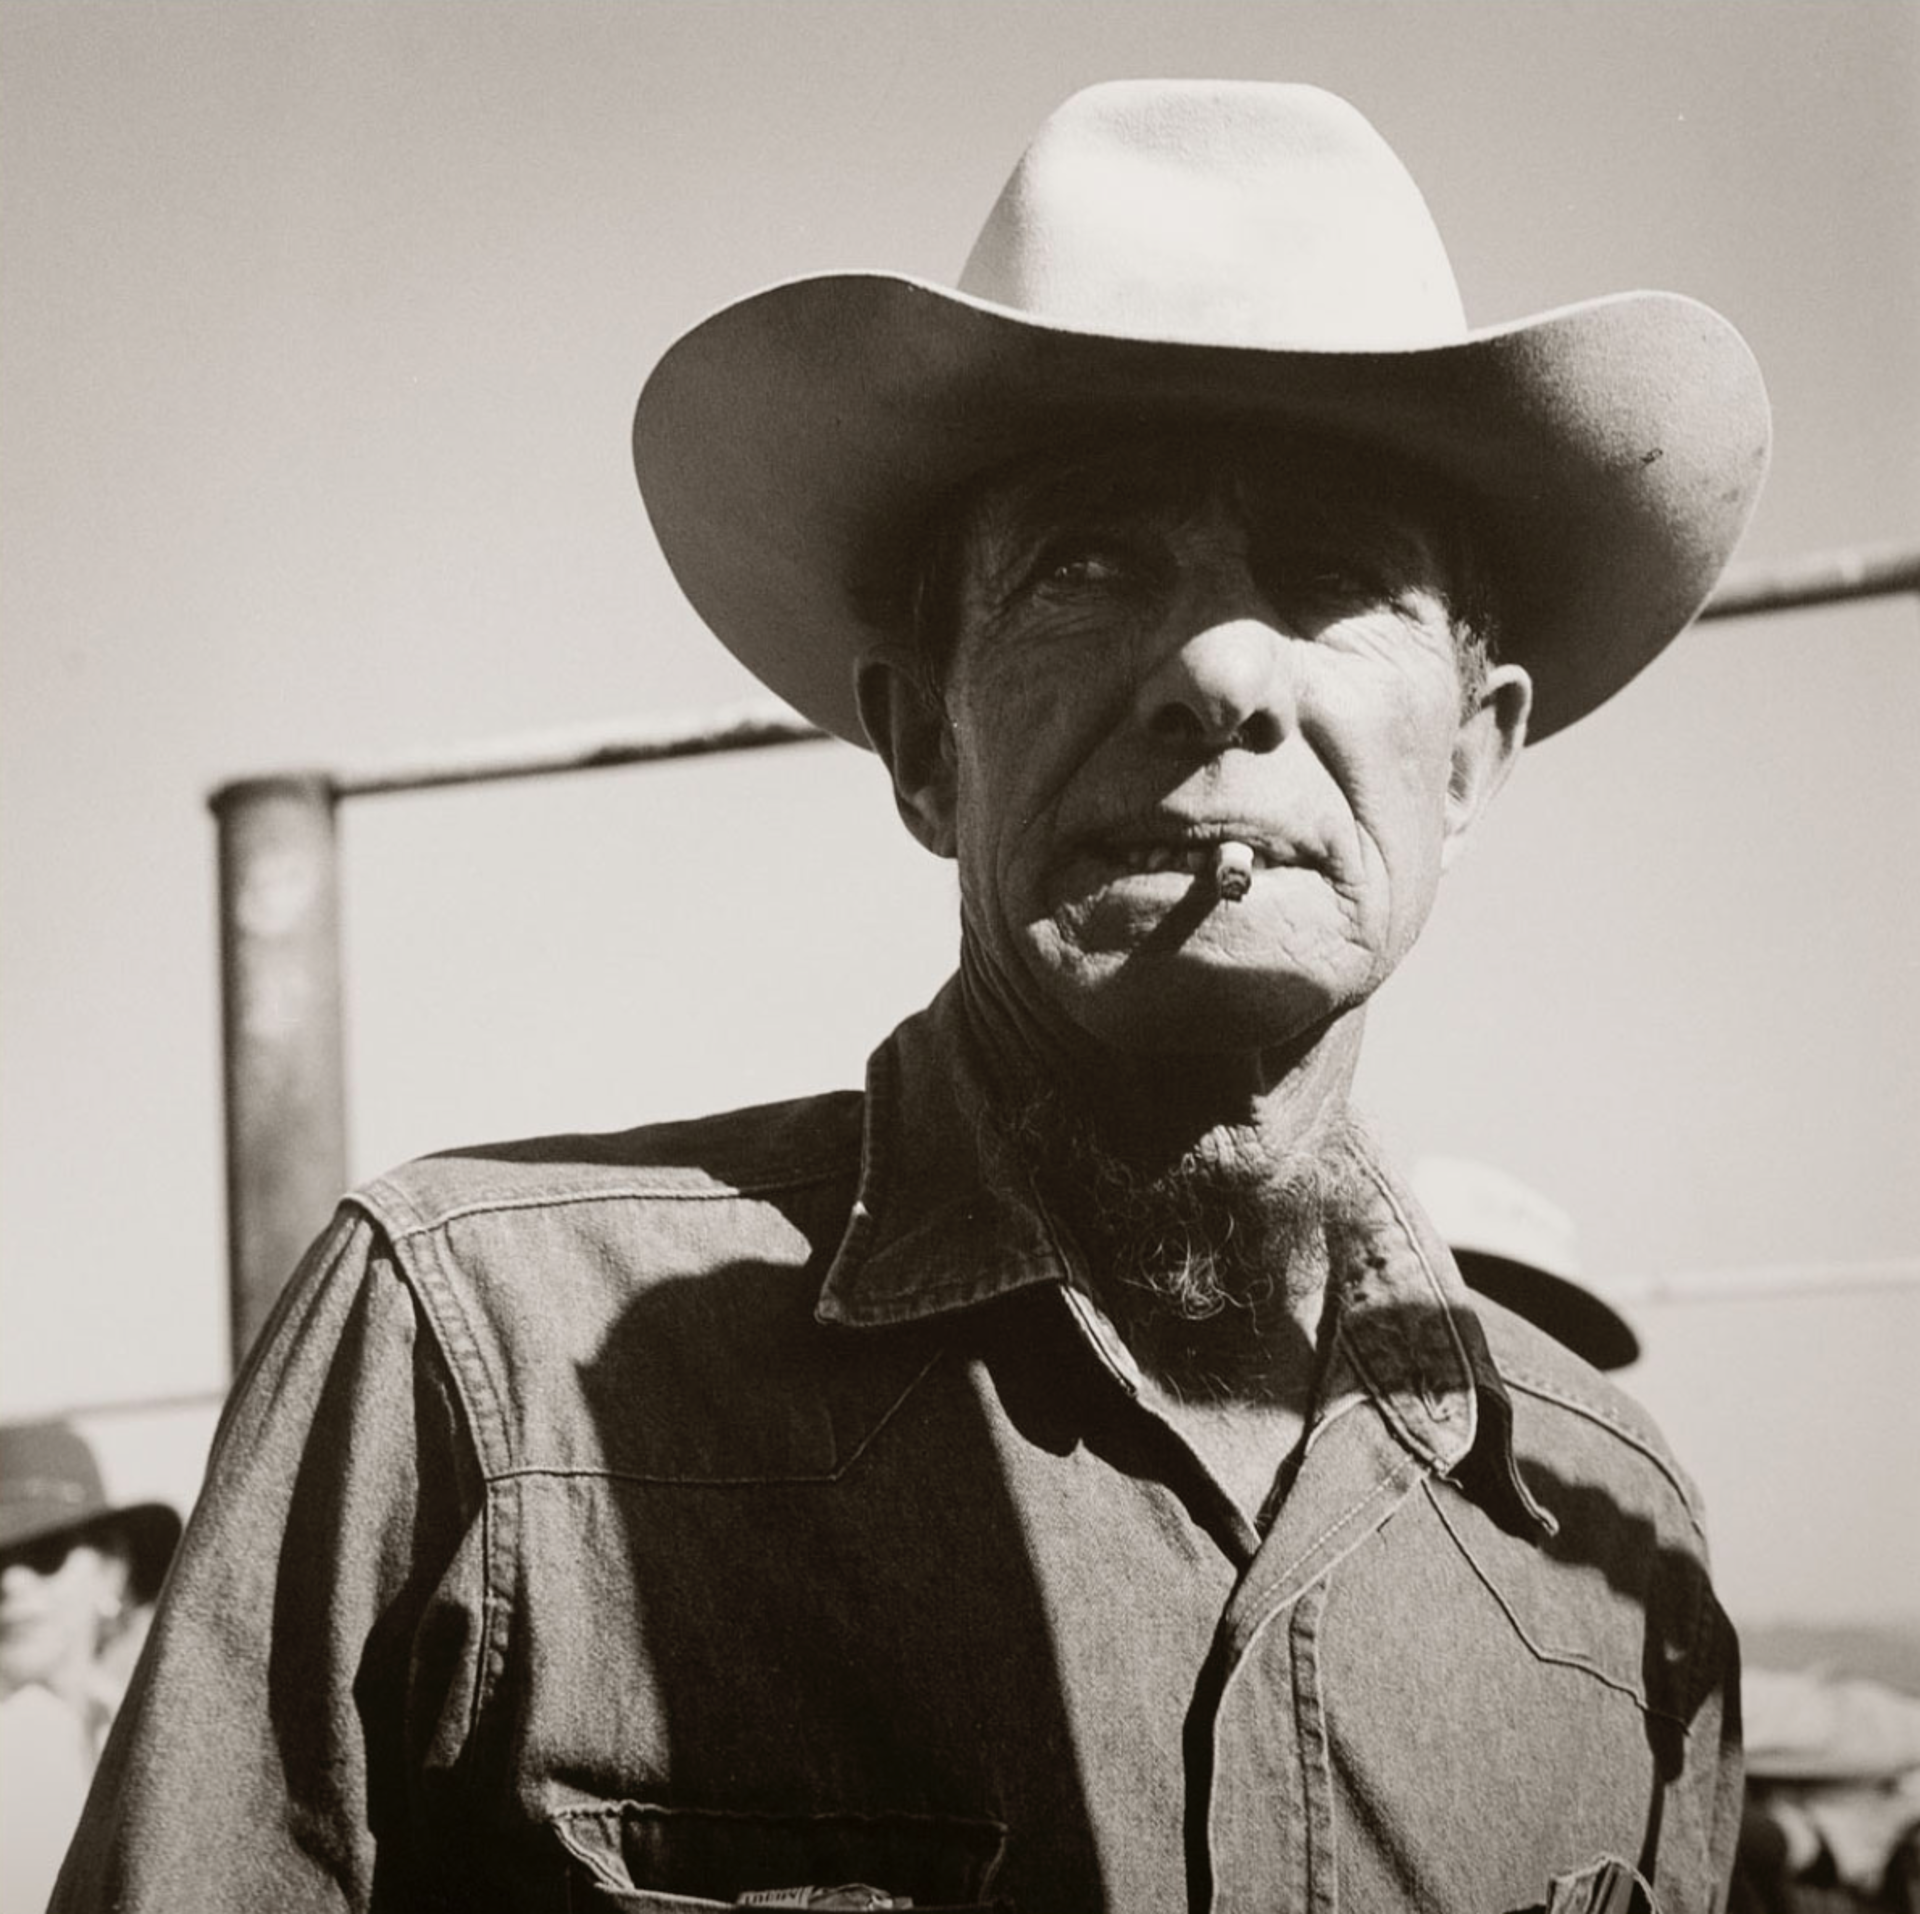 Ike Roberts by James H. Evans